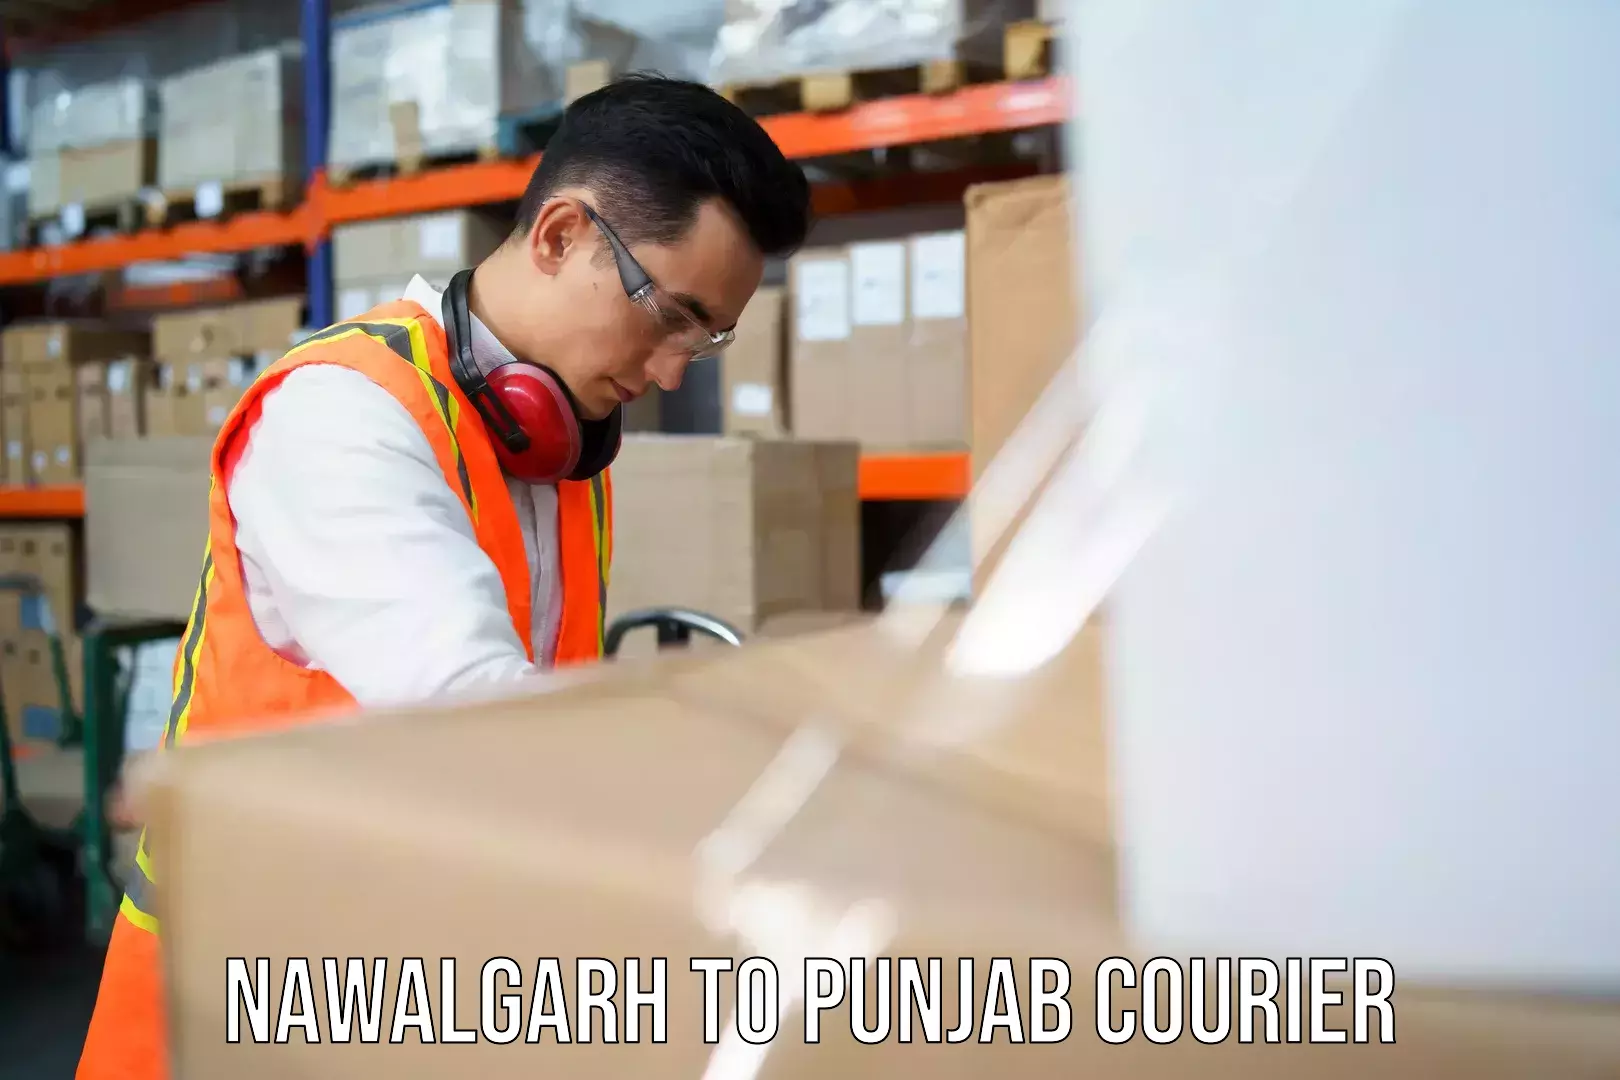 Easy access courier services Nawalgarh to Ajnala